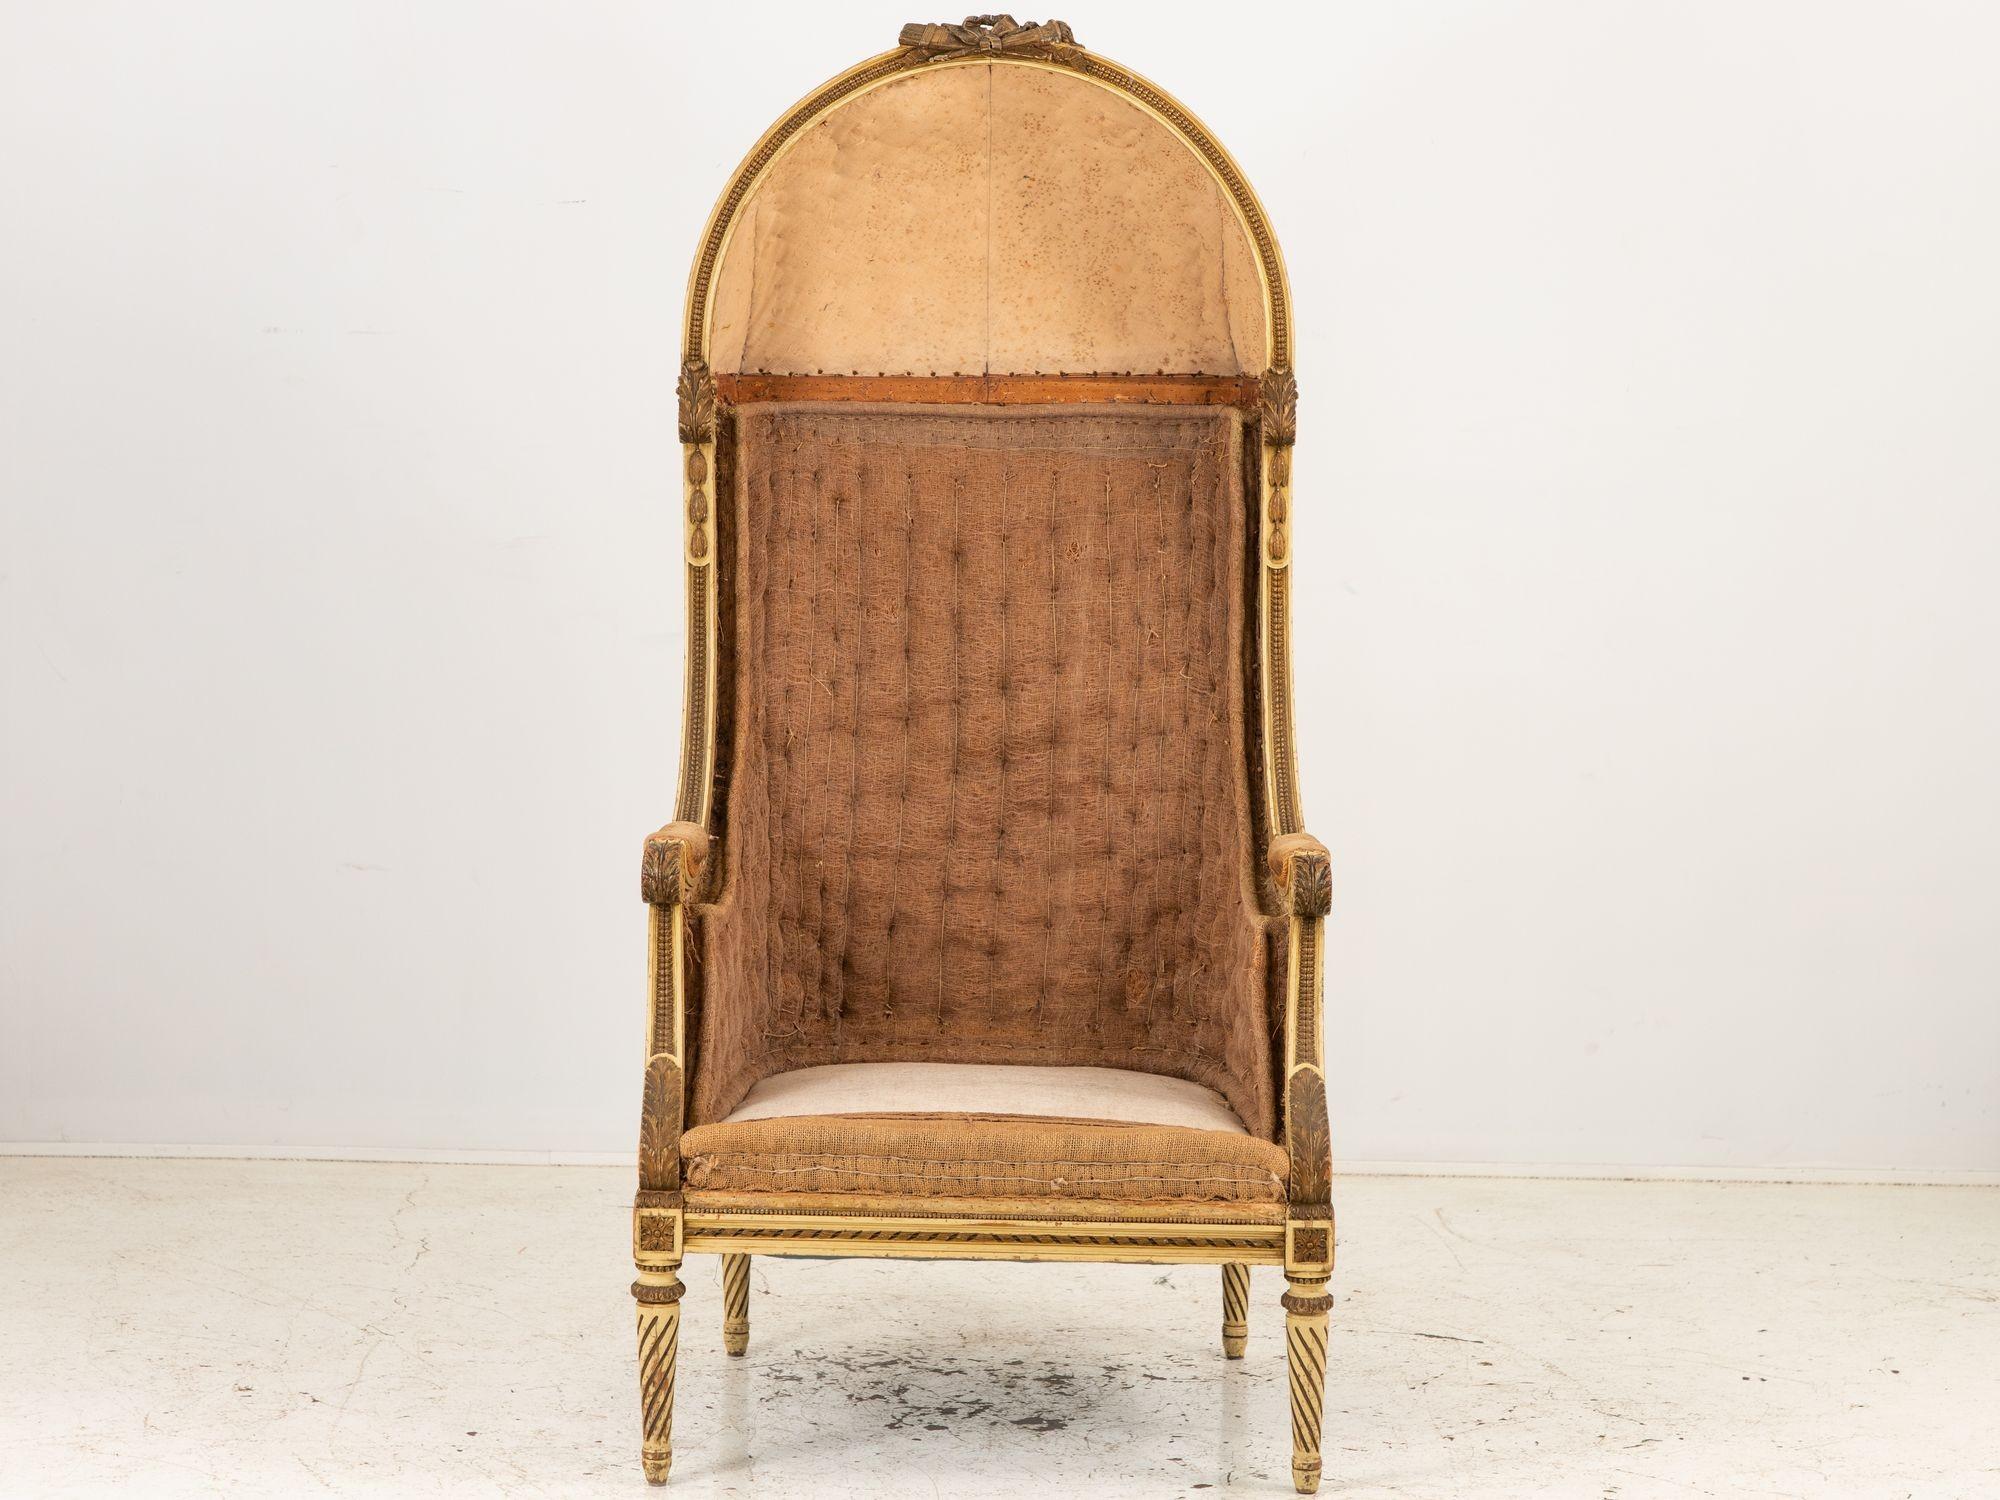 This exquisite 19th-century Louis XV style carved balloon porter's chair is a testament to the timeless elegance of French craftsmanship. Crafted in France during the second half of the 19th century, this chair showcases remnants of gilding that